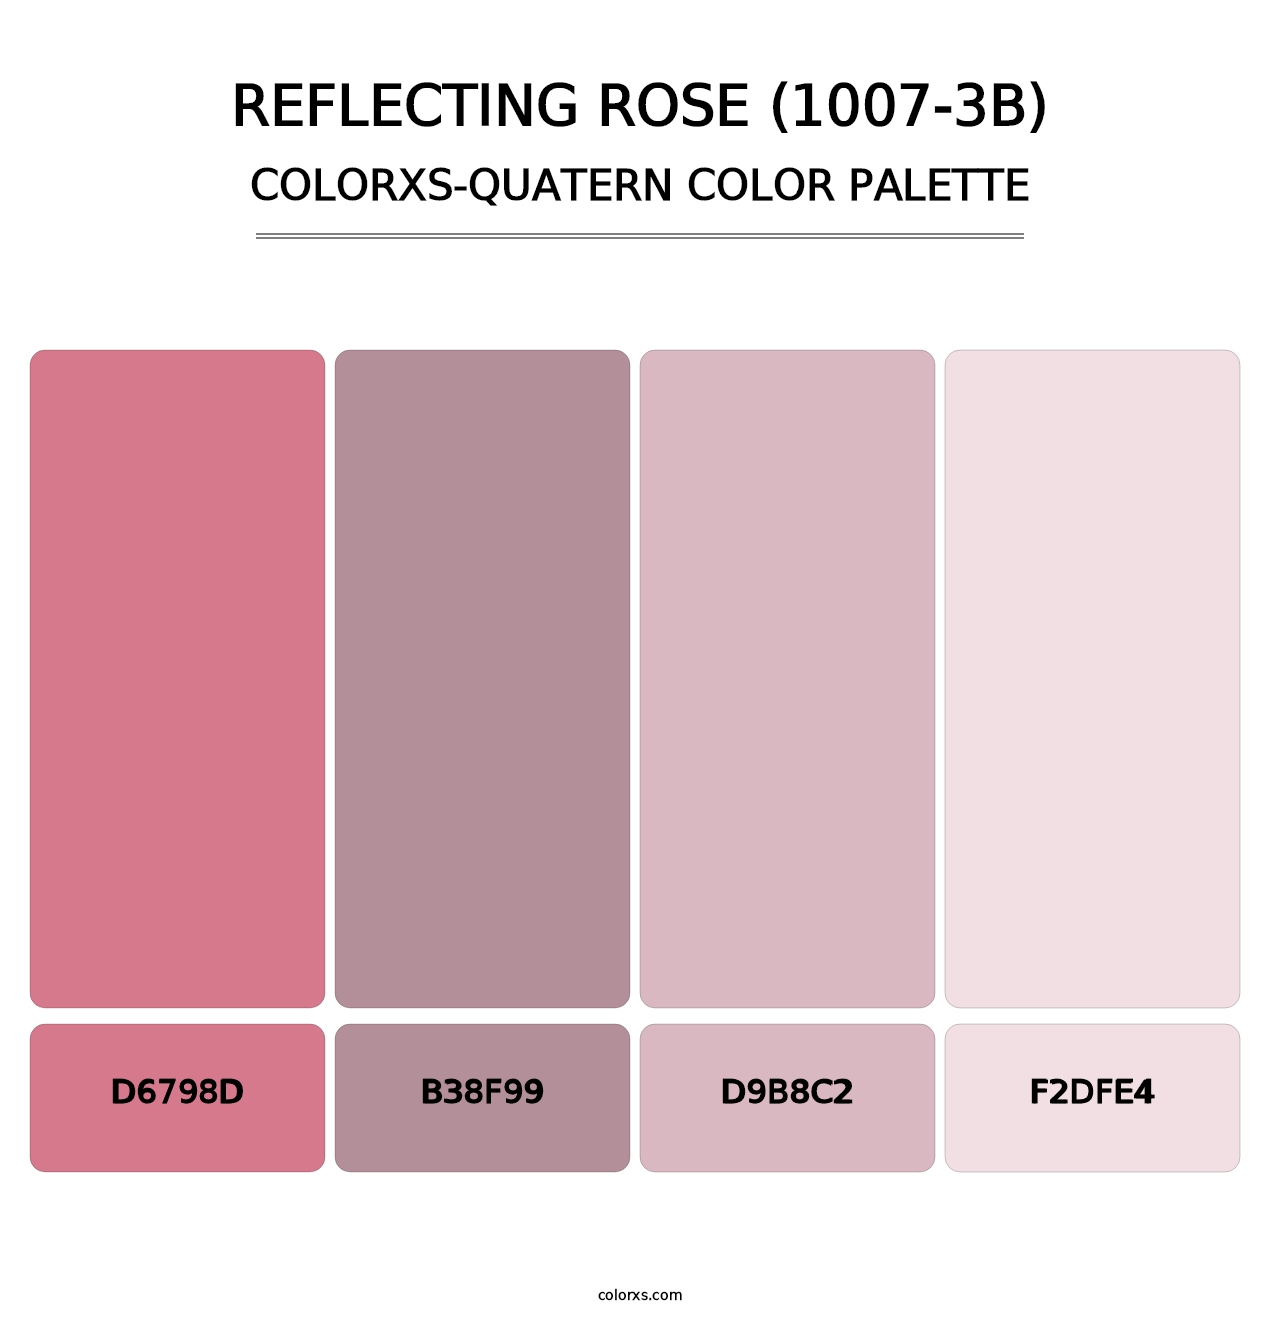 Reflecting Rose (1007-3B) - Colorxs Quatern Palette